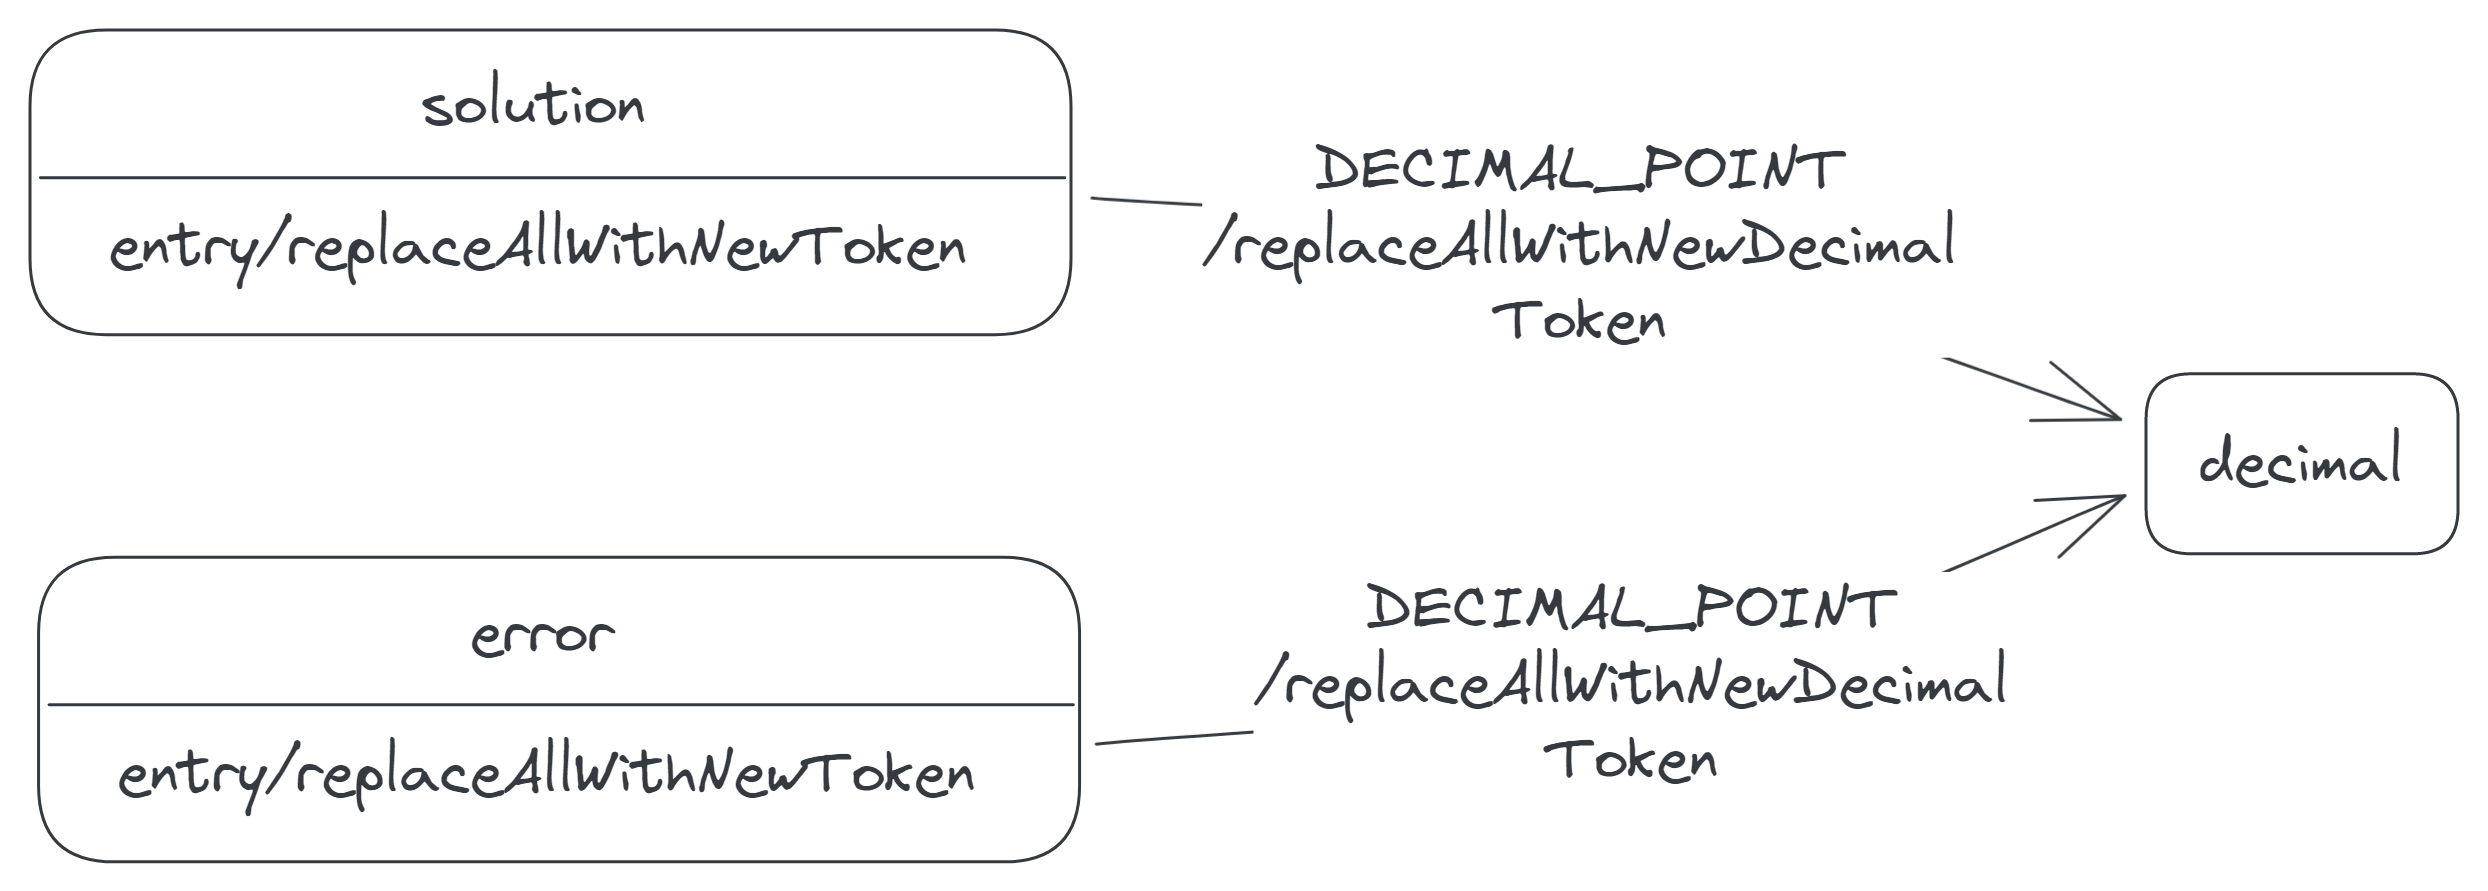 Two transitions labelled 'DECIMAL_POINT/replaceAllWithNewDecimalToken', from the solution and error states to the decimal state.